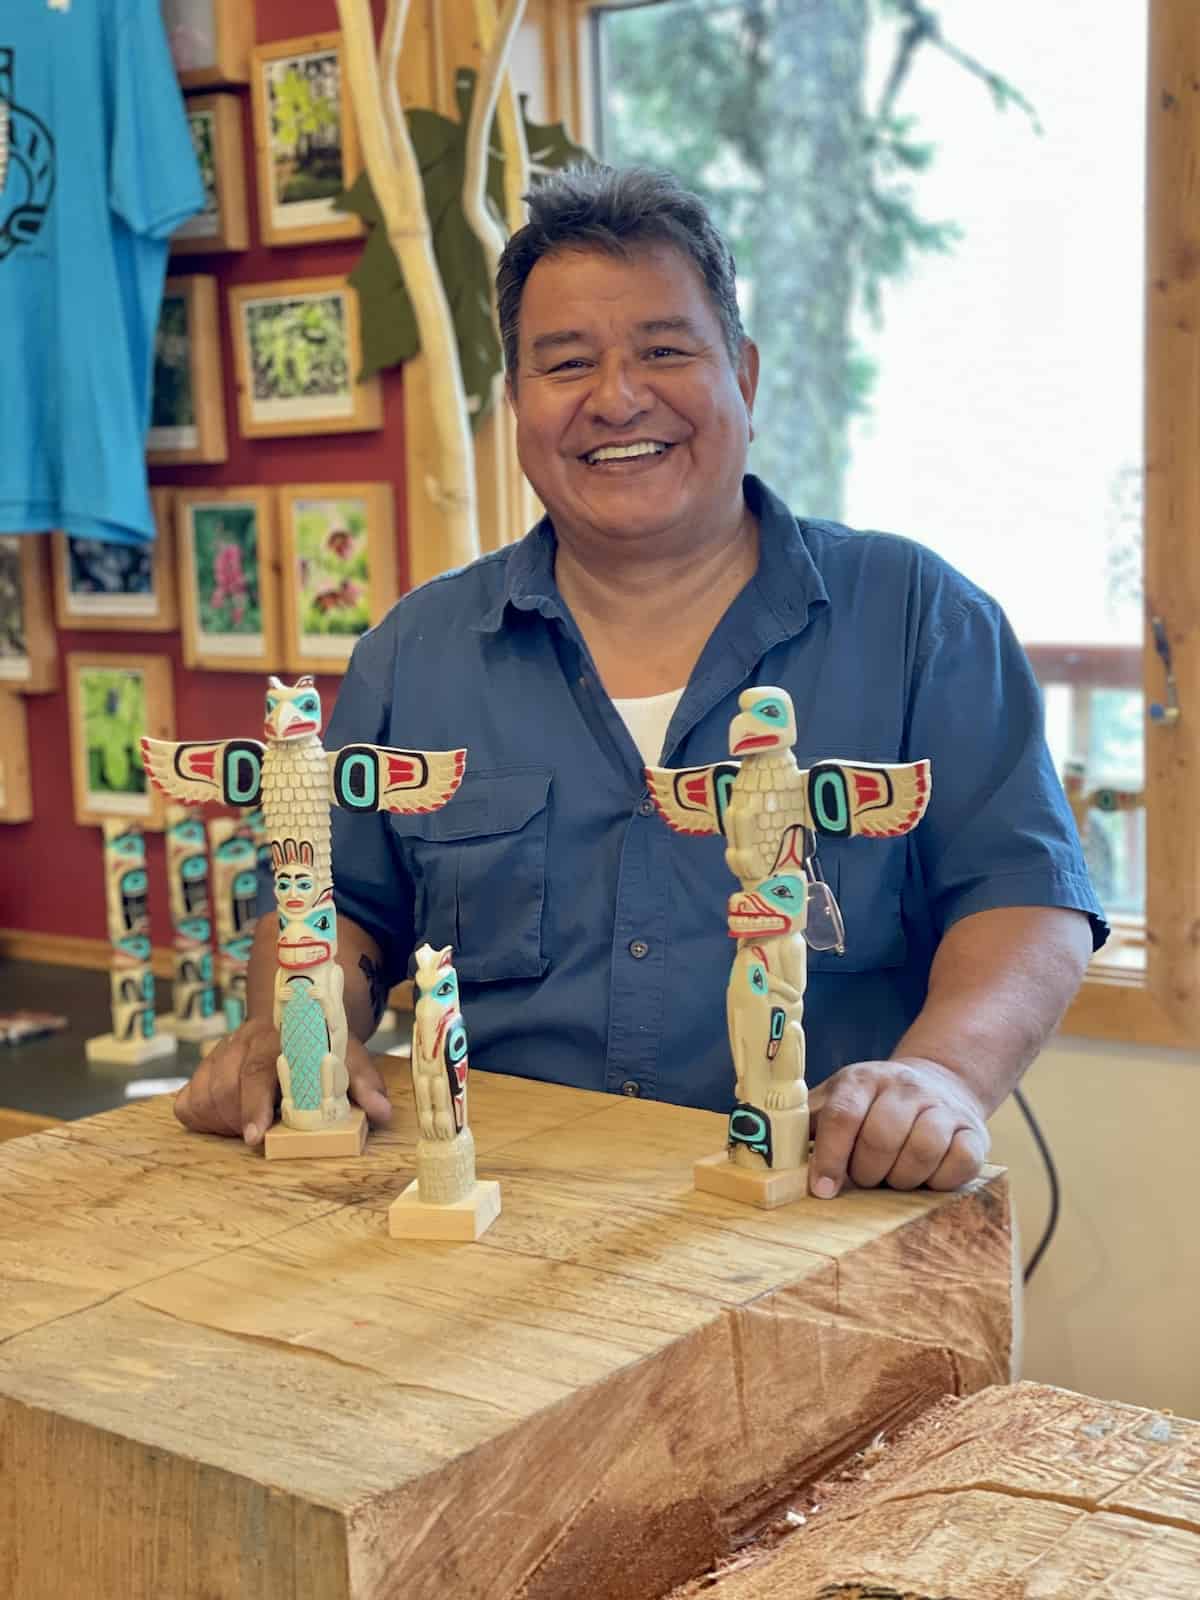 Man smiling with totem poles.